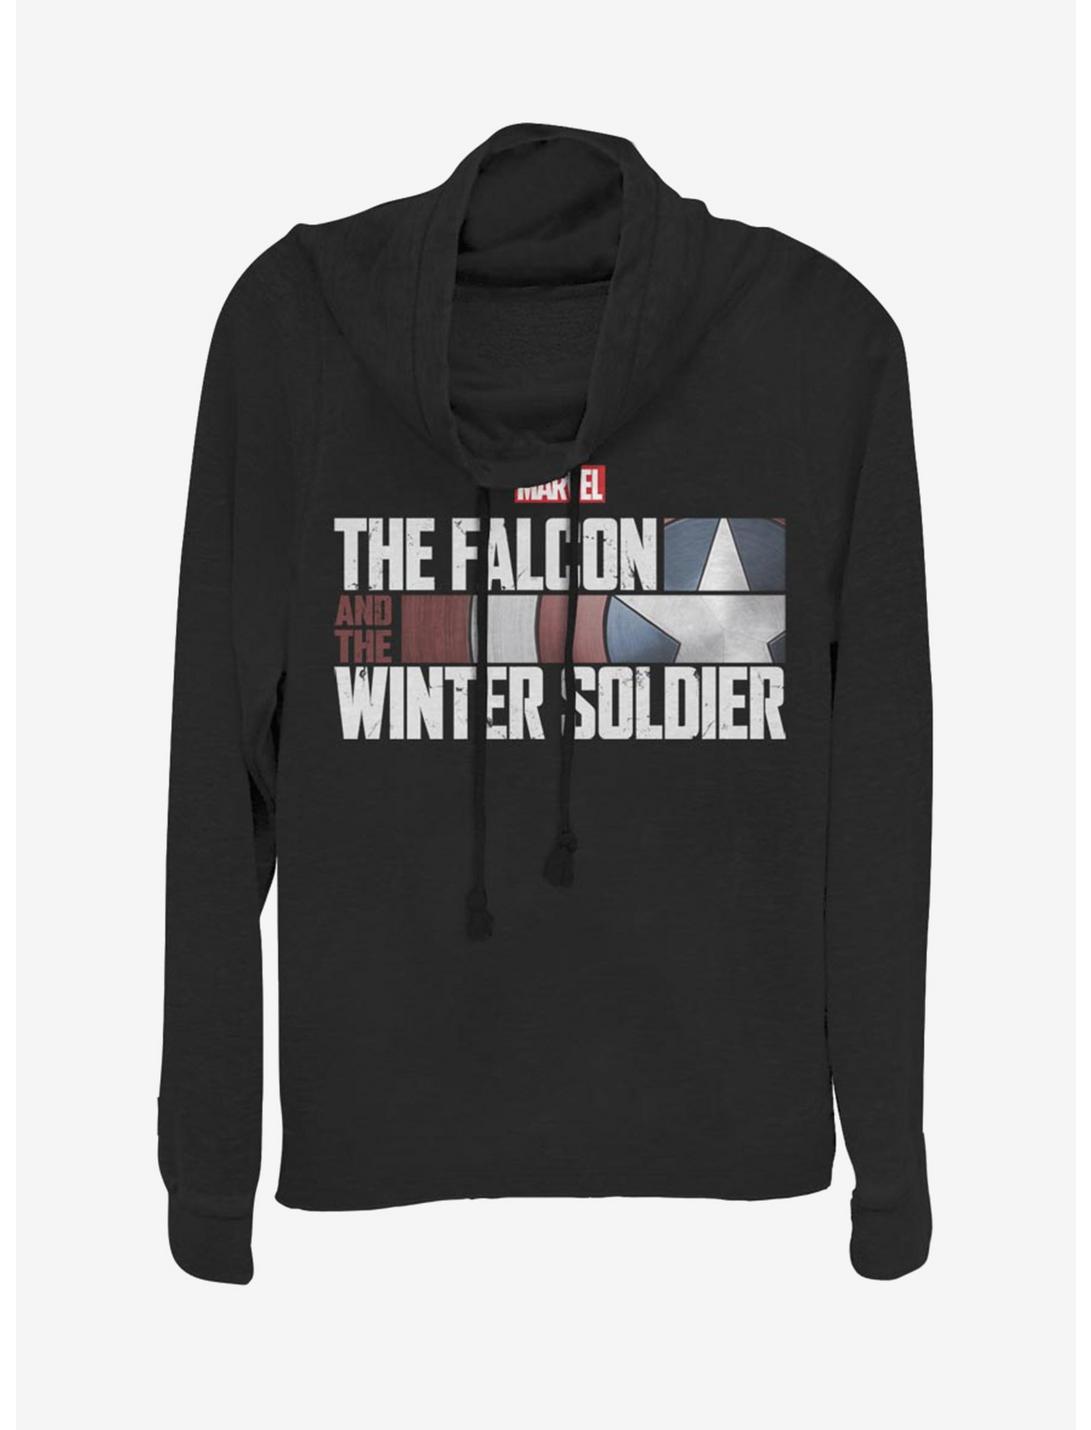 Marvel The Falcon And The Winter Solider Cowl Neck Long-Sleeve Girls Top, BLACK, hi-res